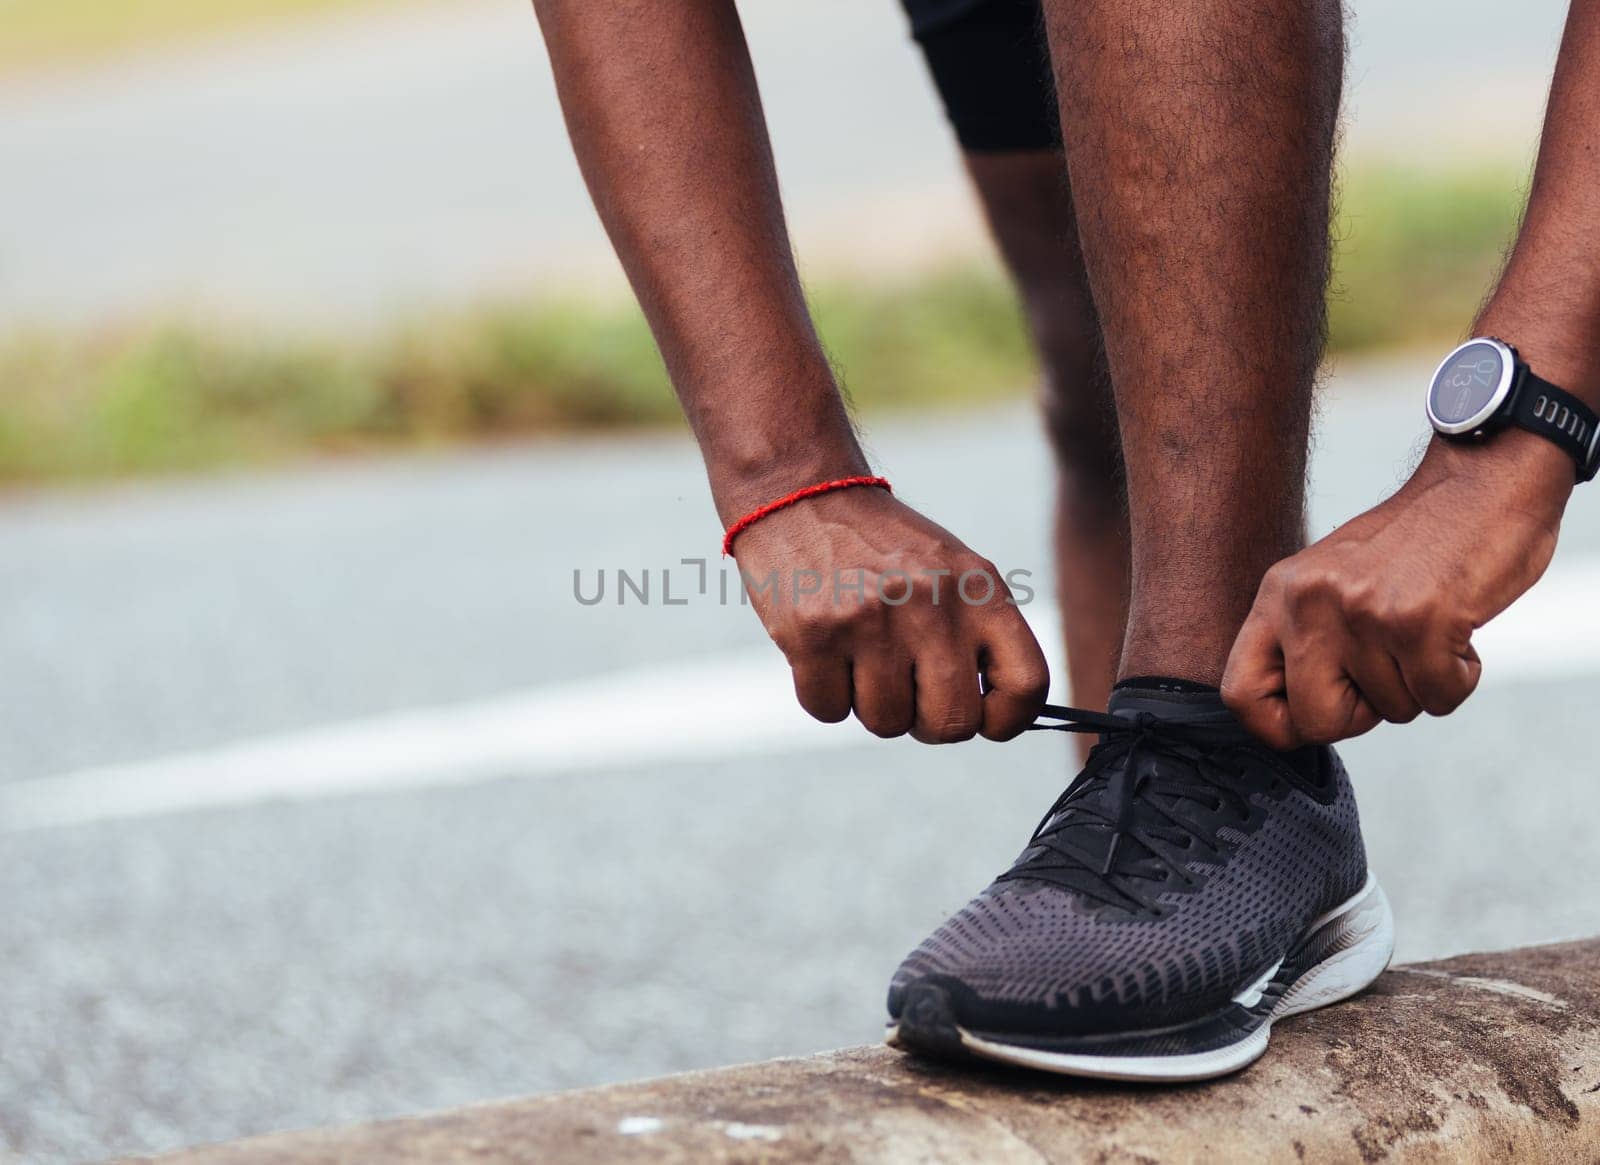 runner black man wear watch stand step on the footpath trying shoelace running shoes by Sorapop